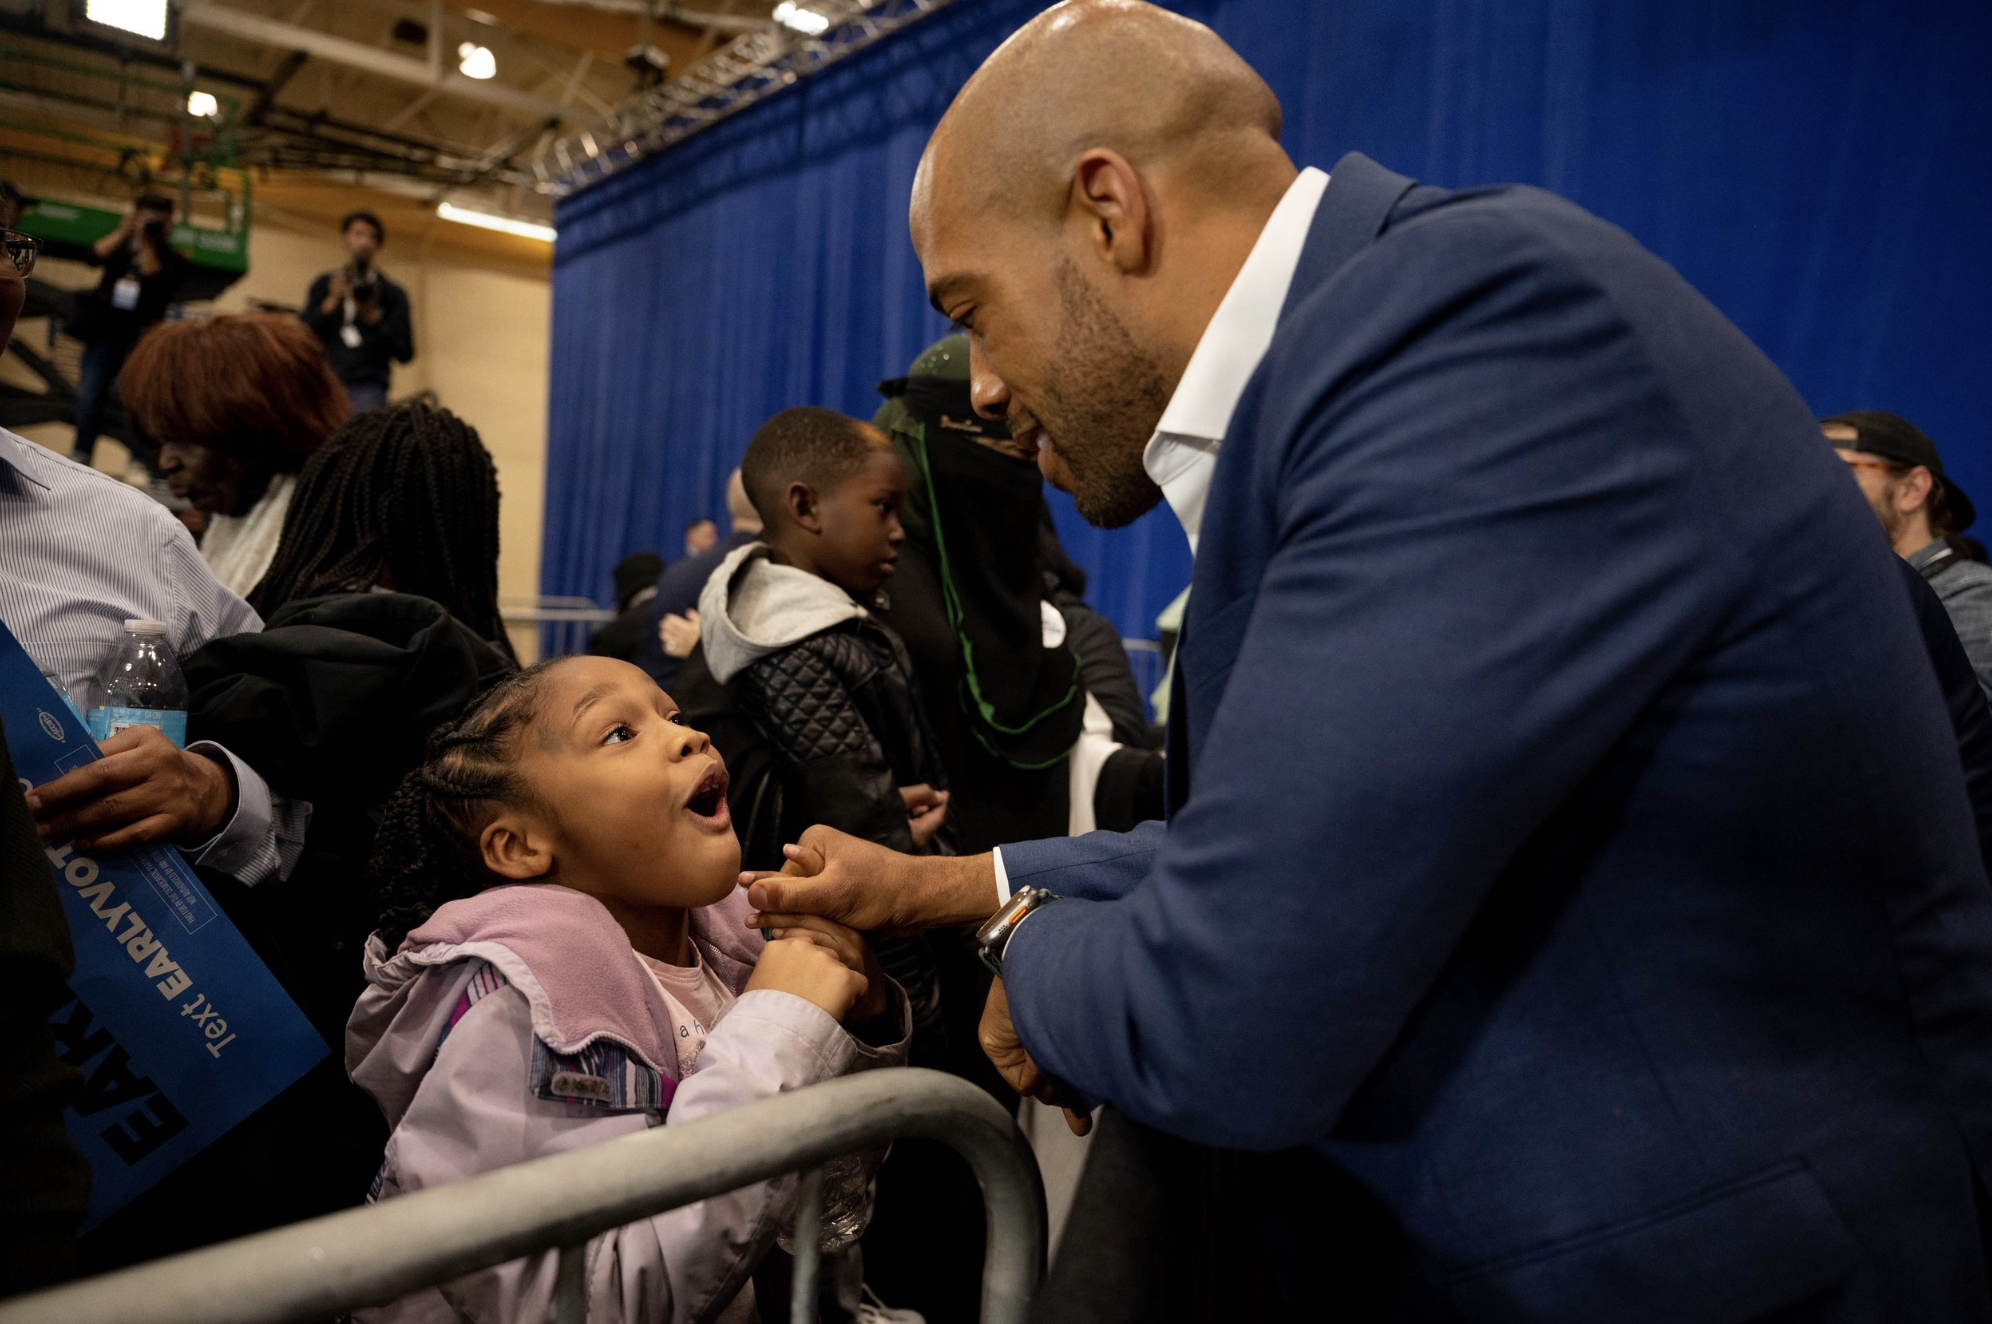 Lt. Governor Mandela Barnes, Democratic nominee for U.S. Senate, and a young supporter at a campaign rally, Wisconsin, 2022